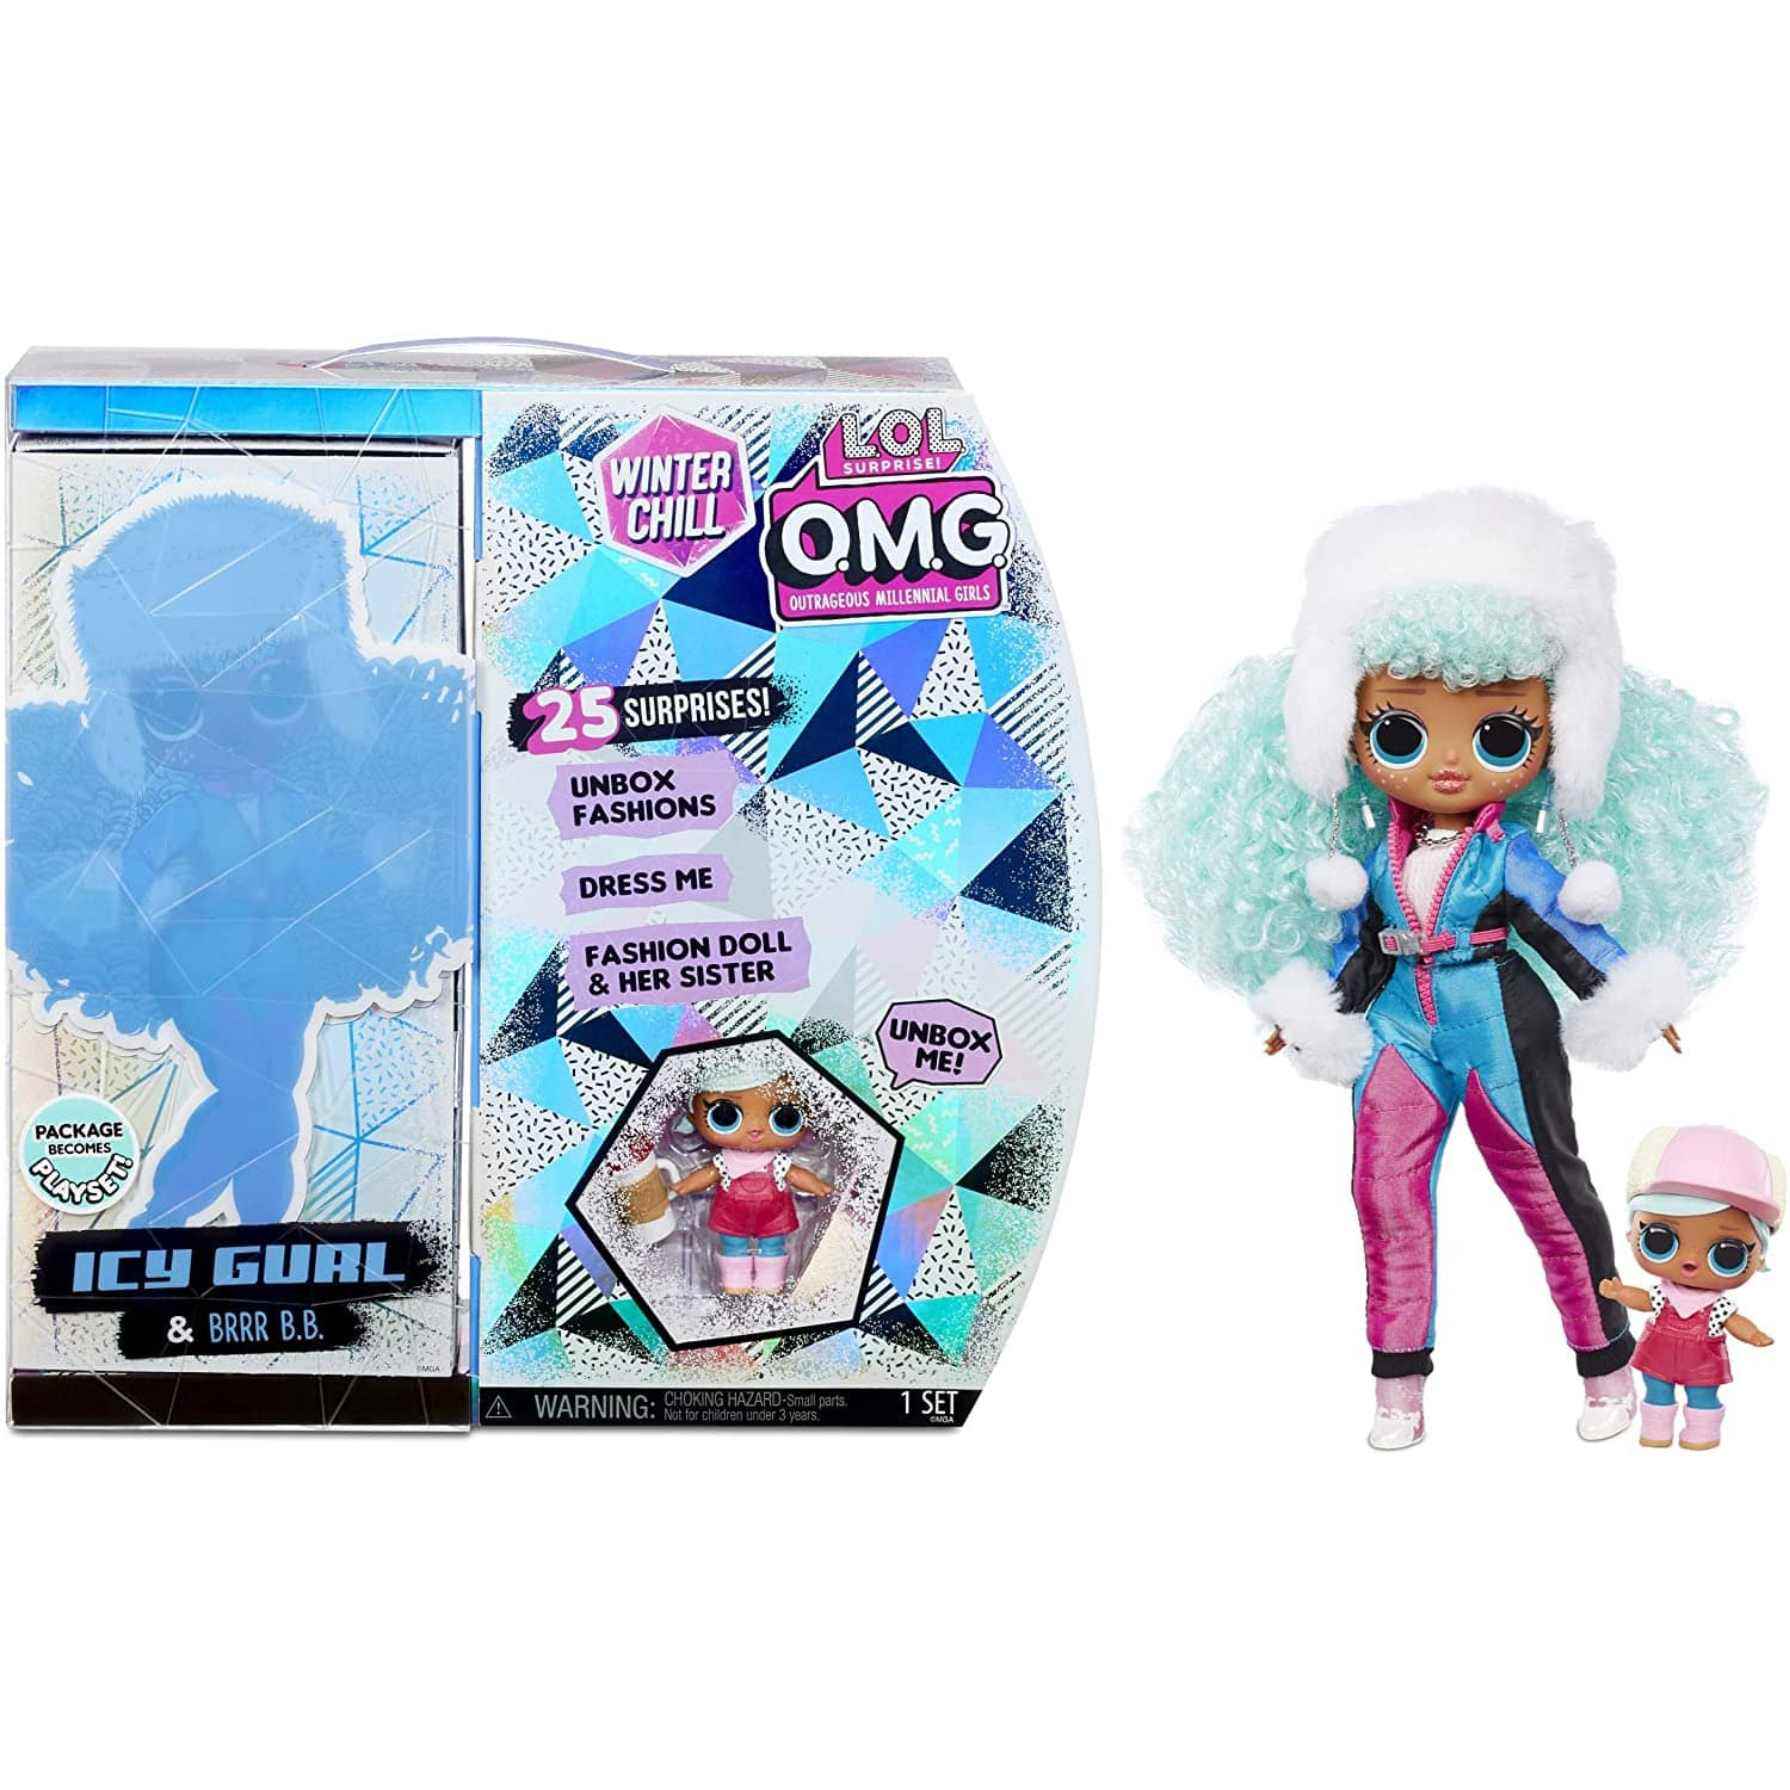 LOL Surprise OMG Winter Chill Muñeca Icy Gurl | Toy Planet